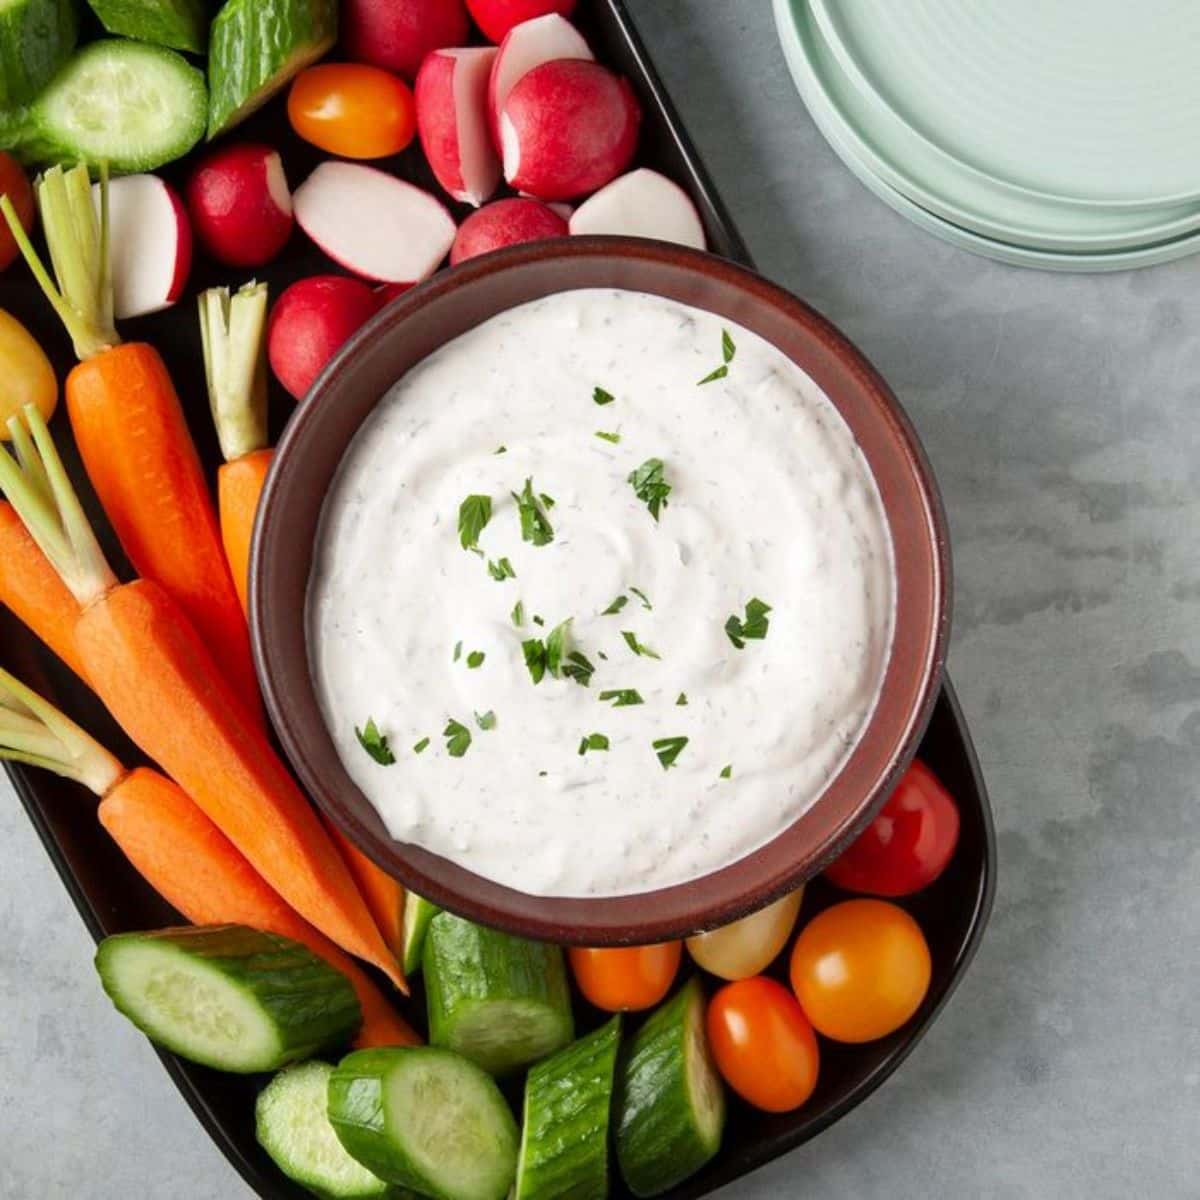 Crudite Dip in a brown bowl on a tray with sliced veggies.